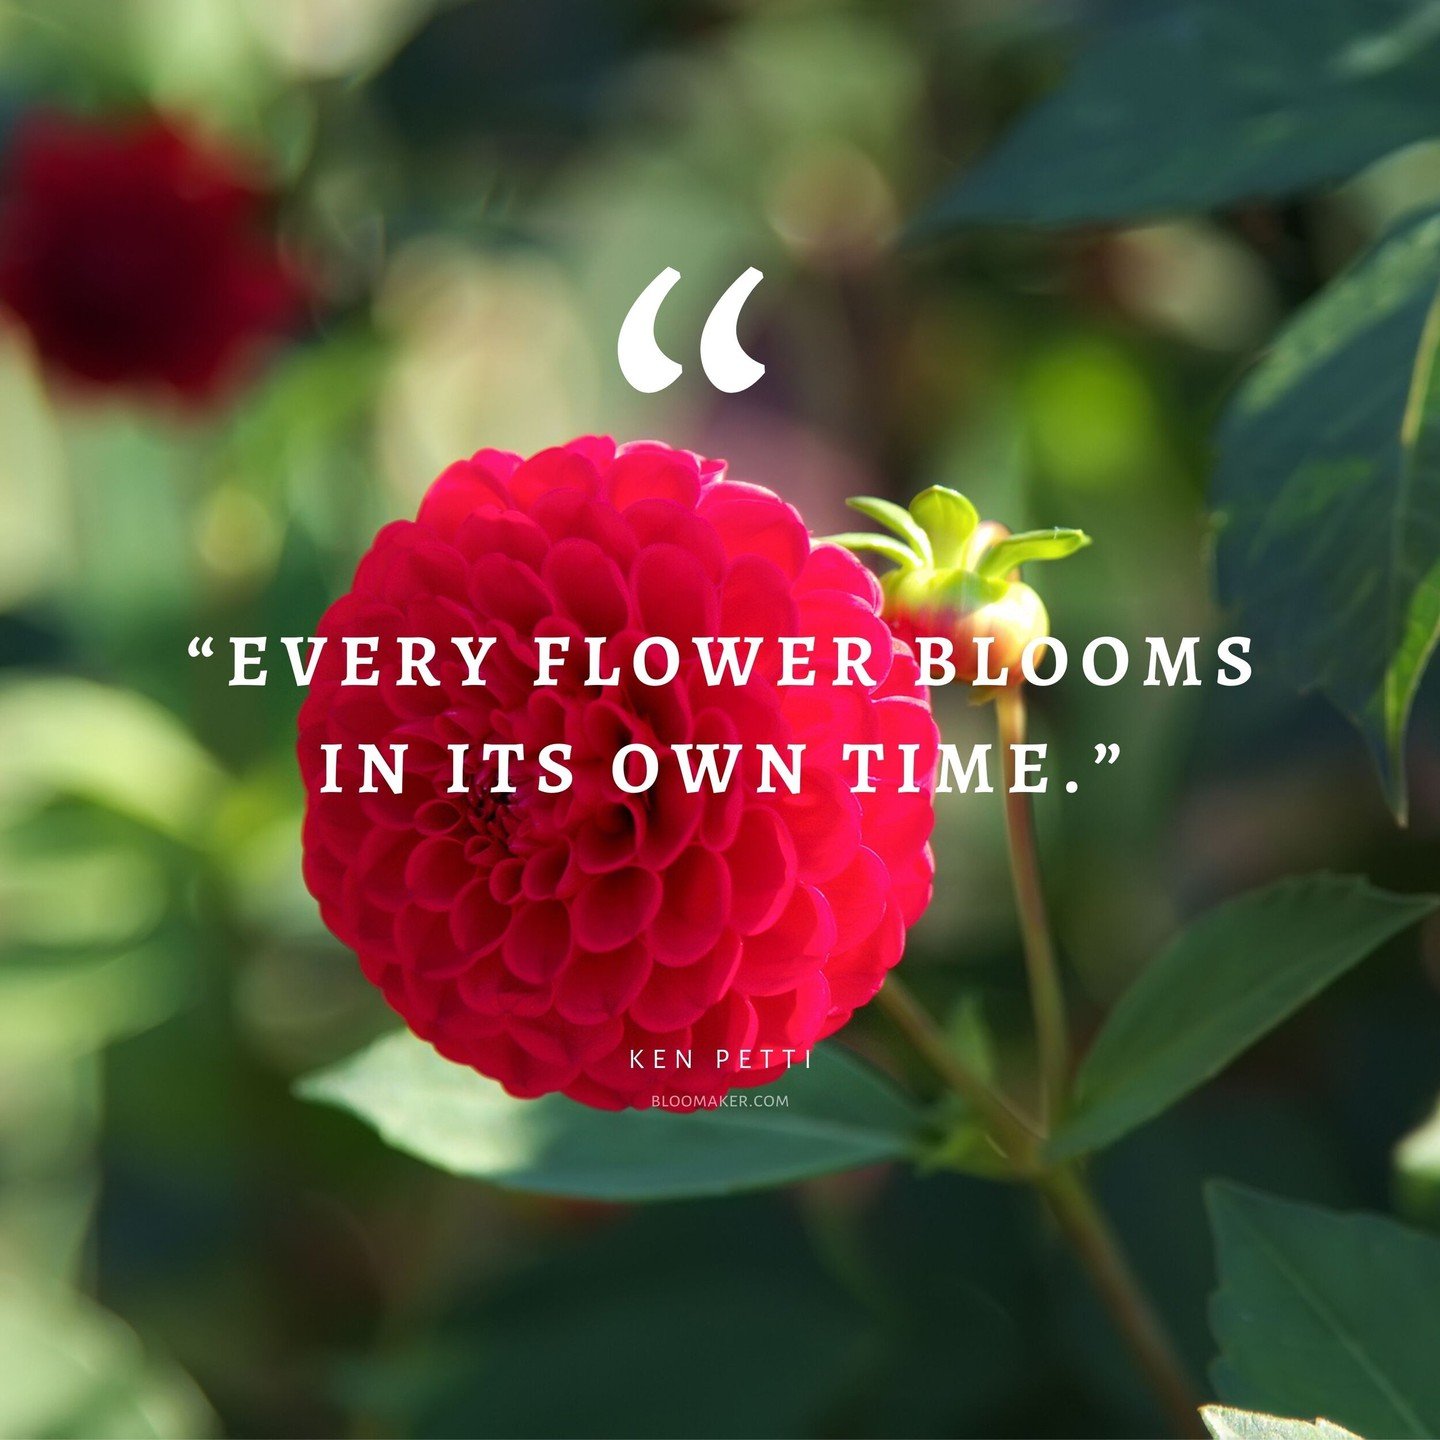 Flowers are a beautiful reminder of the power of patience.

Seeds must be planted in the soil before they can bloom, so whether you're in the dark or blooming in the sun, you're doing great!